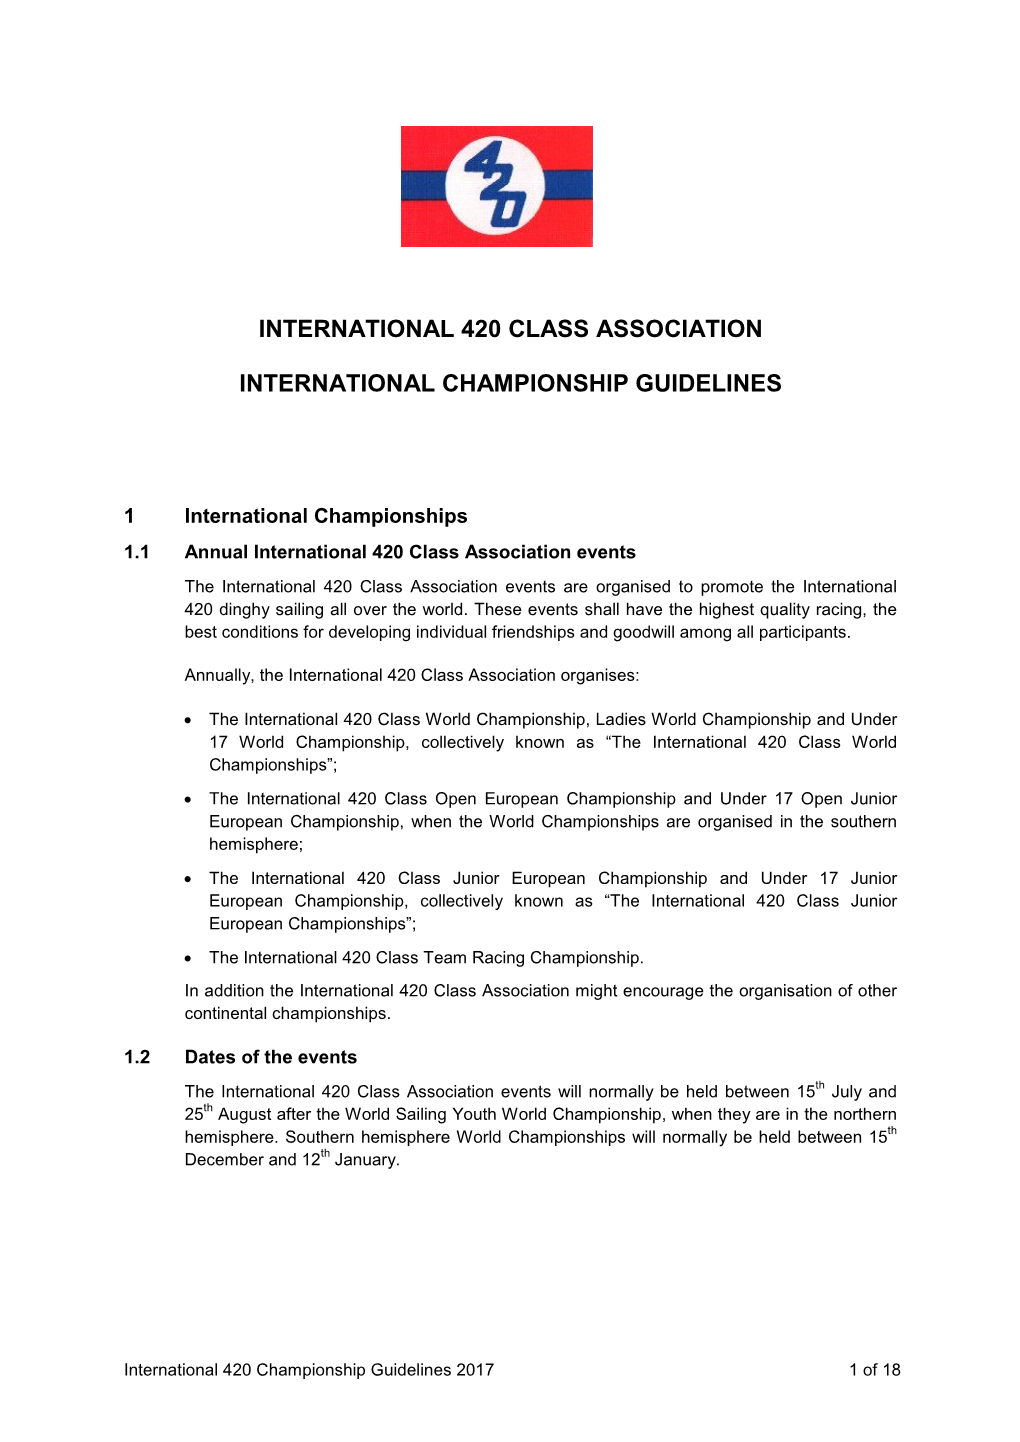 Championship Guidelines